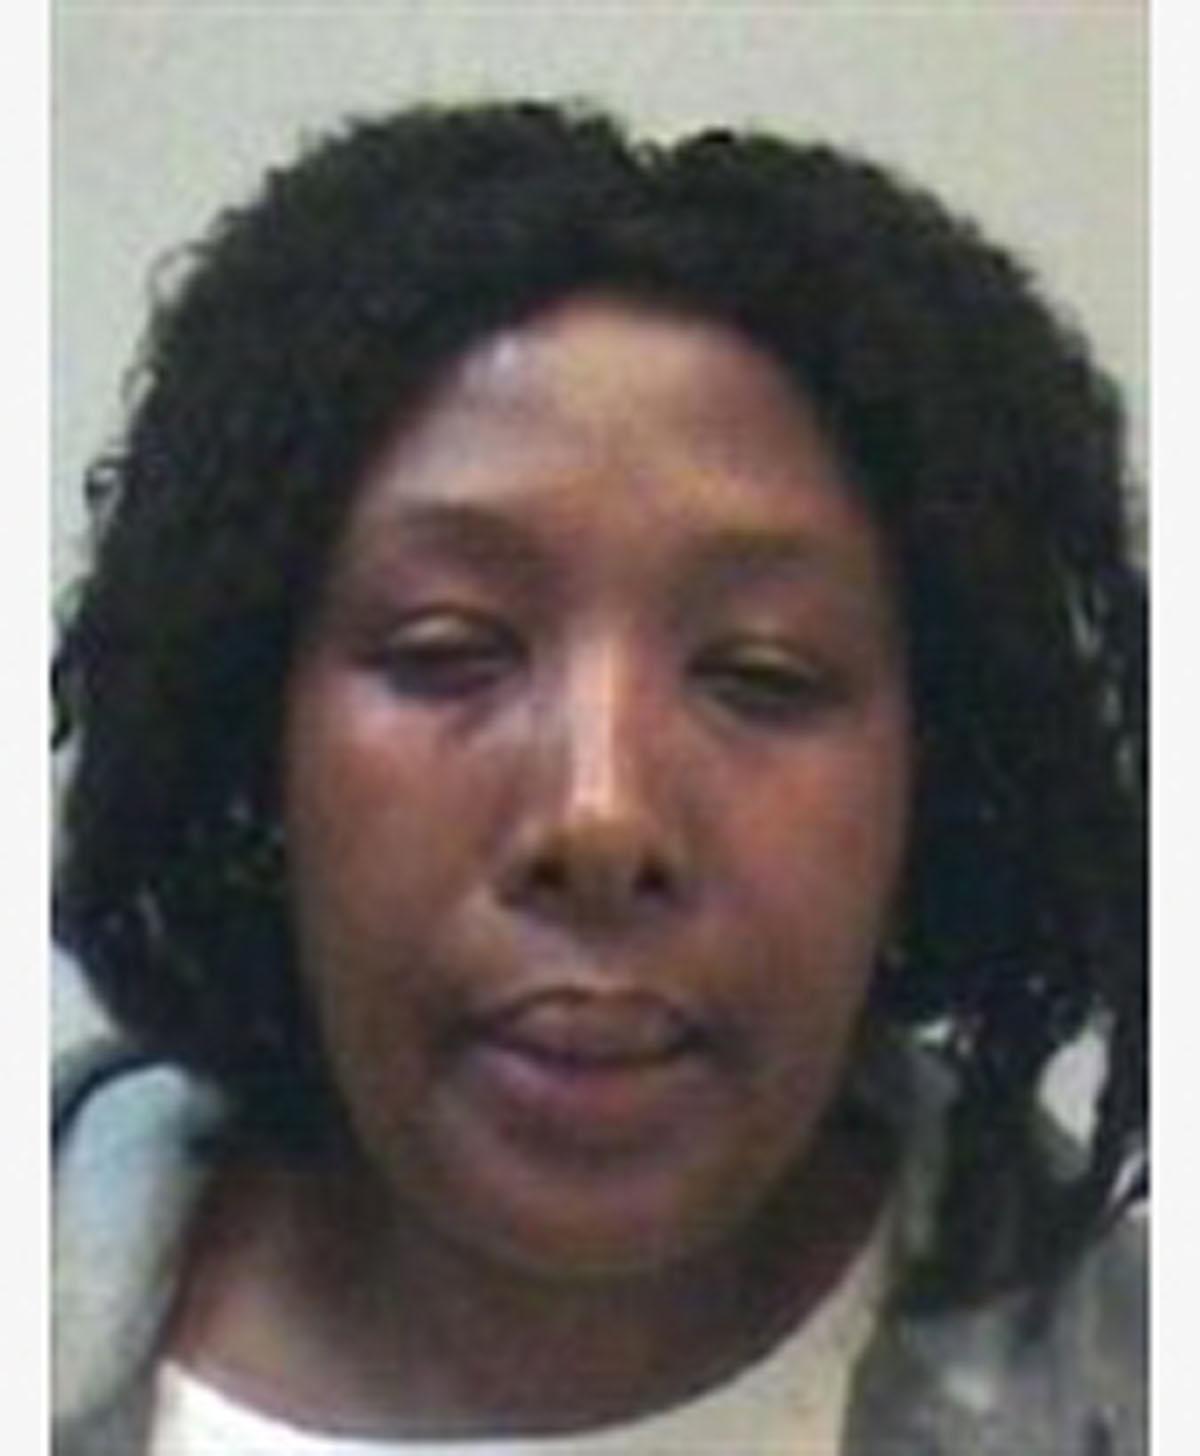 Nokwazi Culube is wanted for five identity fraud and immigration offences. She failed to return on bail to be charged and bailed to court in July 2007.